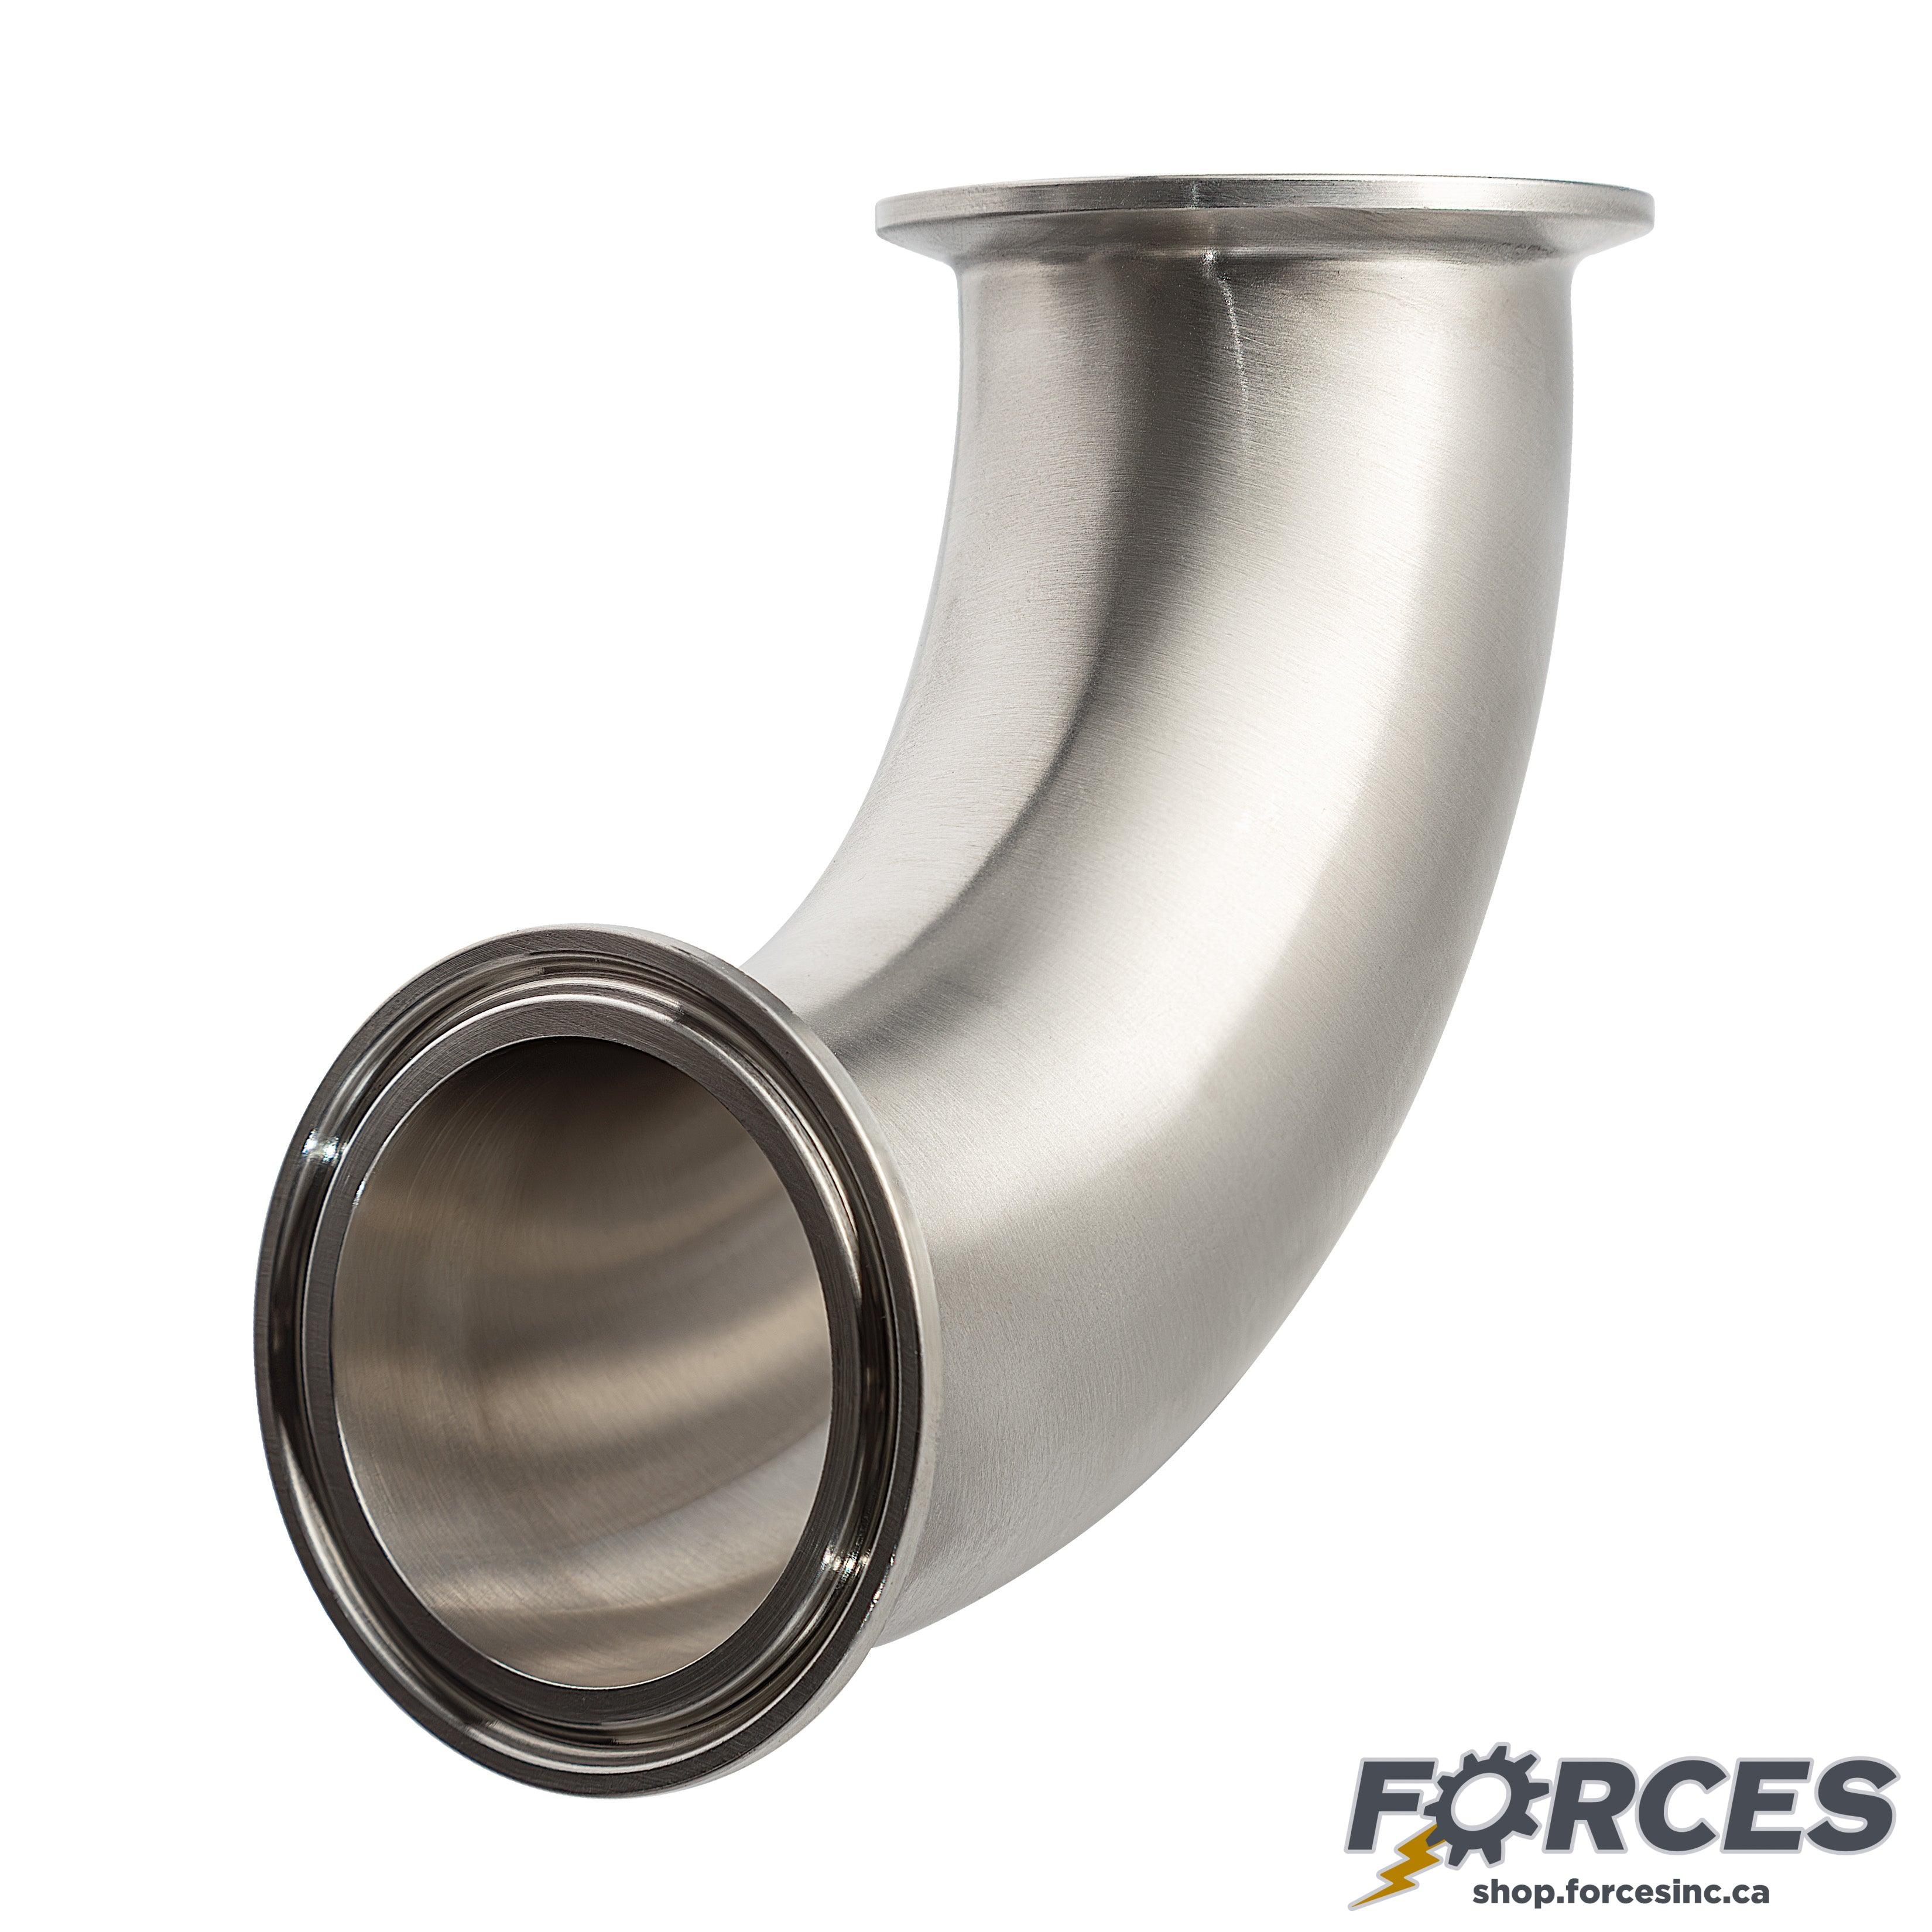 6" Tri-Clamp 90° Elbow - Stainless Steel 304 - Forces Inc